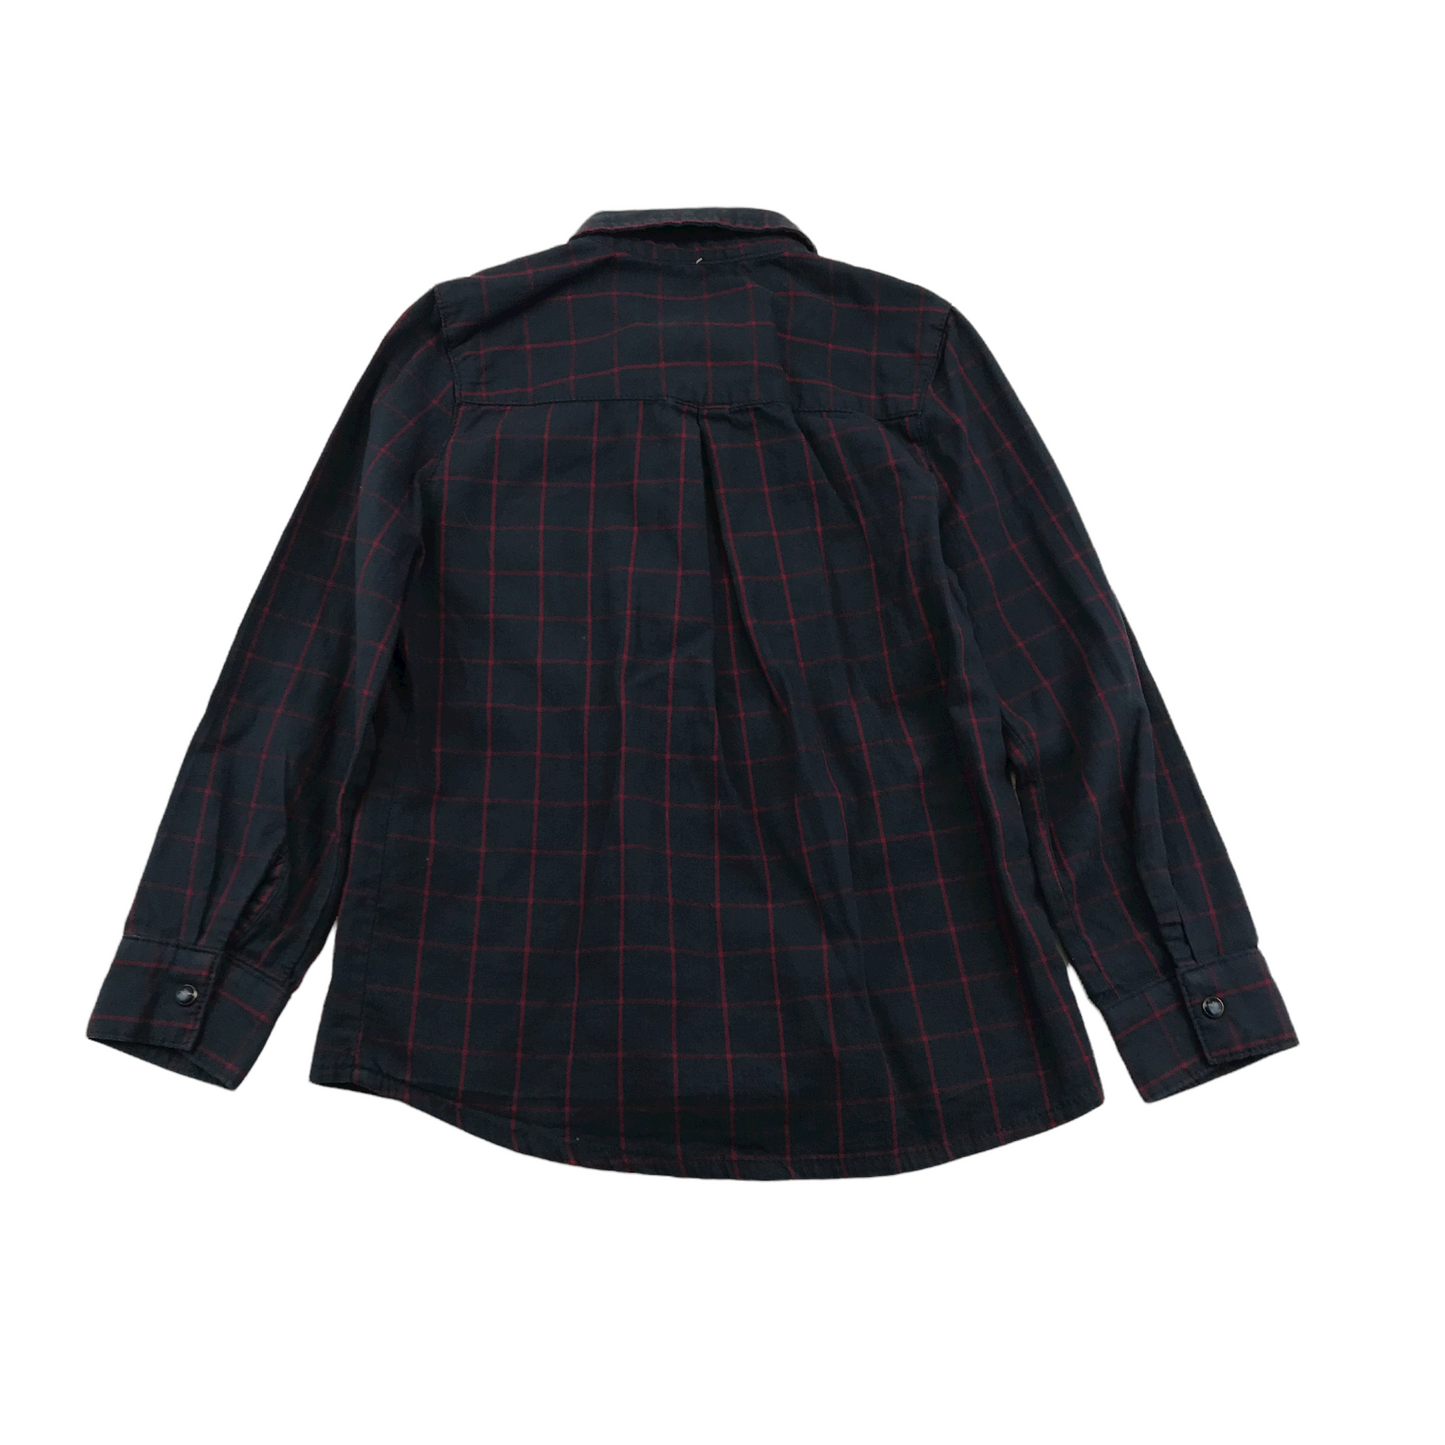 La Redoute Dark Navy and Red Checked Shirt Age 5